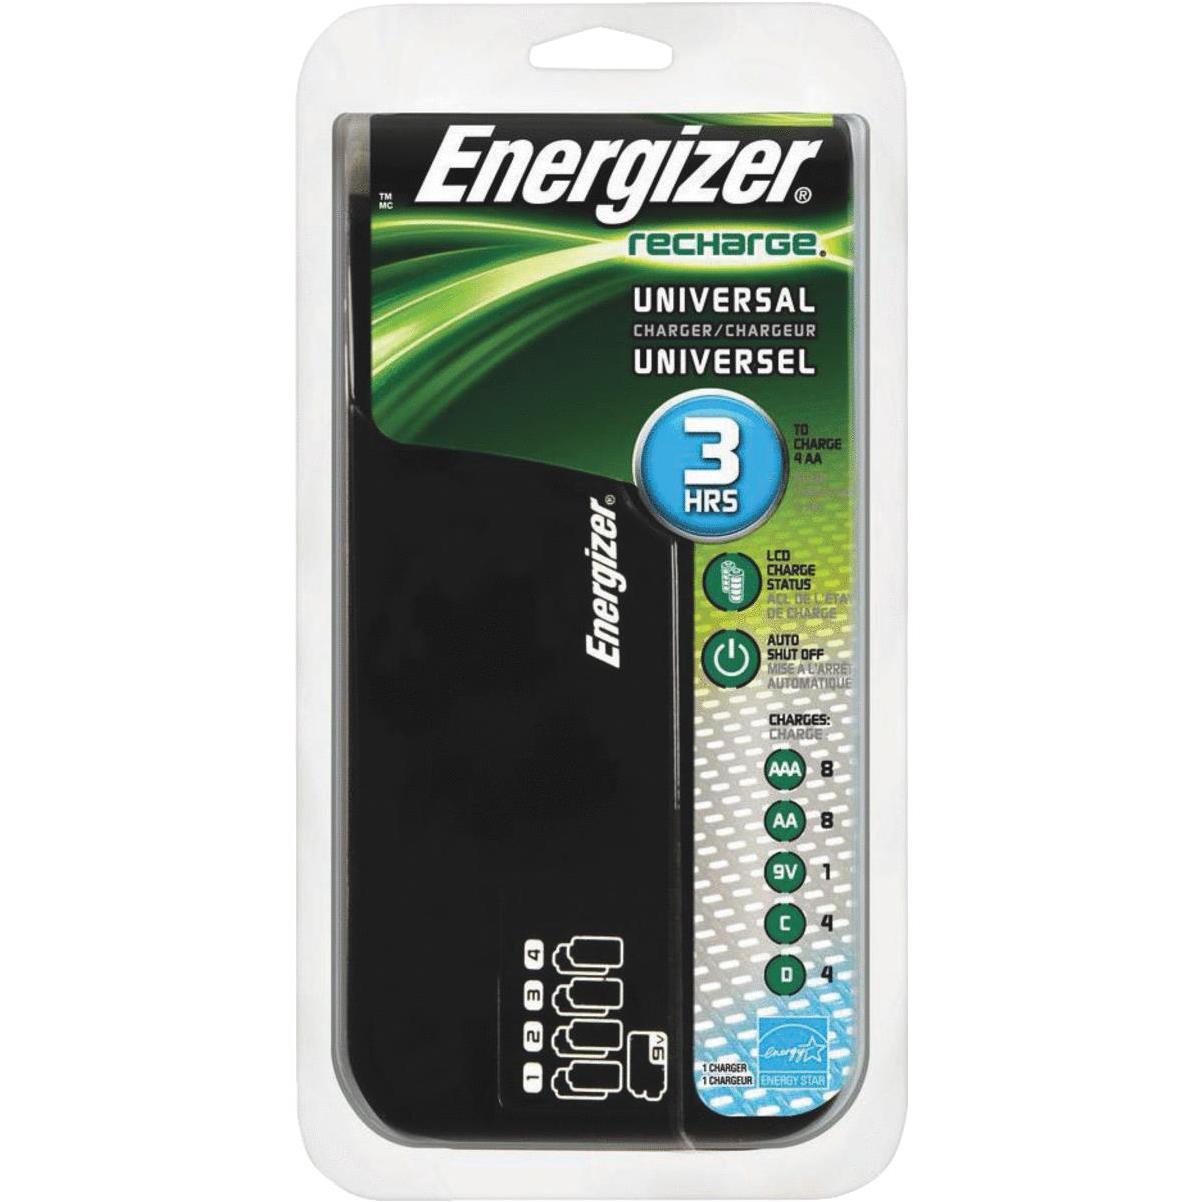 AA 4pk C 2pk Energizer CHFC Universal Battery Charger w/ AAA 4pk D 2pk and 9v 